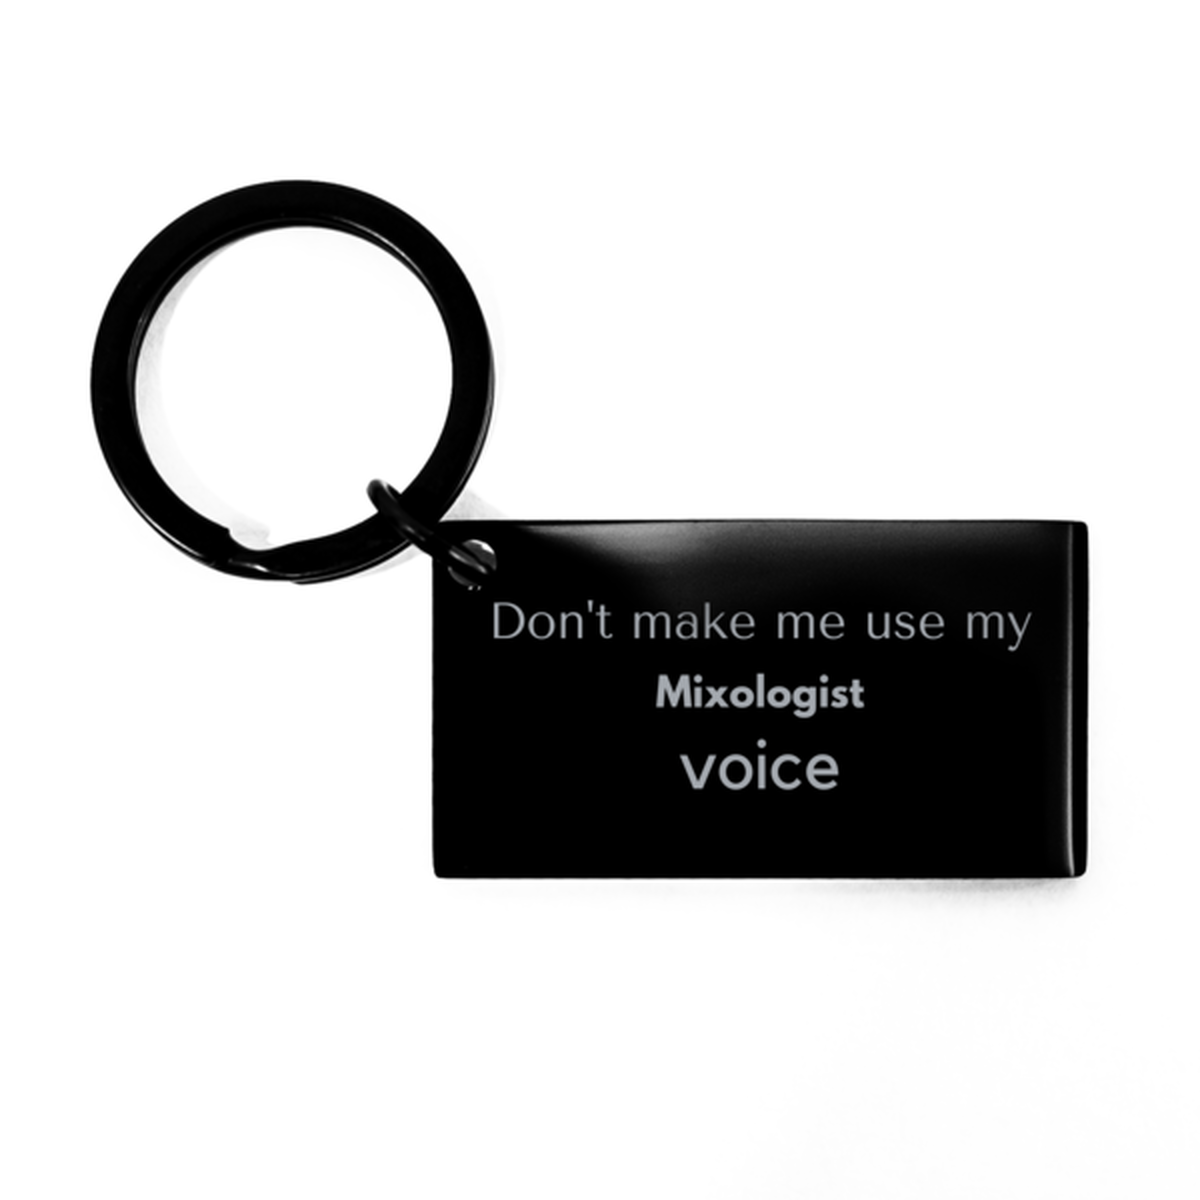 Don't make me use my Mixologist voice, Sarcasm Mixologist Gifts, Christmas Mixologist Keychain Birthday Unique Gifts For Mixologist Coworkers, Men, Women, Colleague, Friends